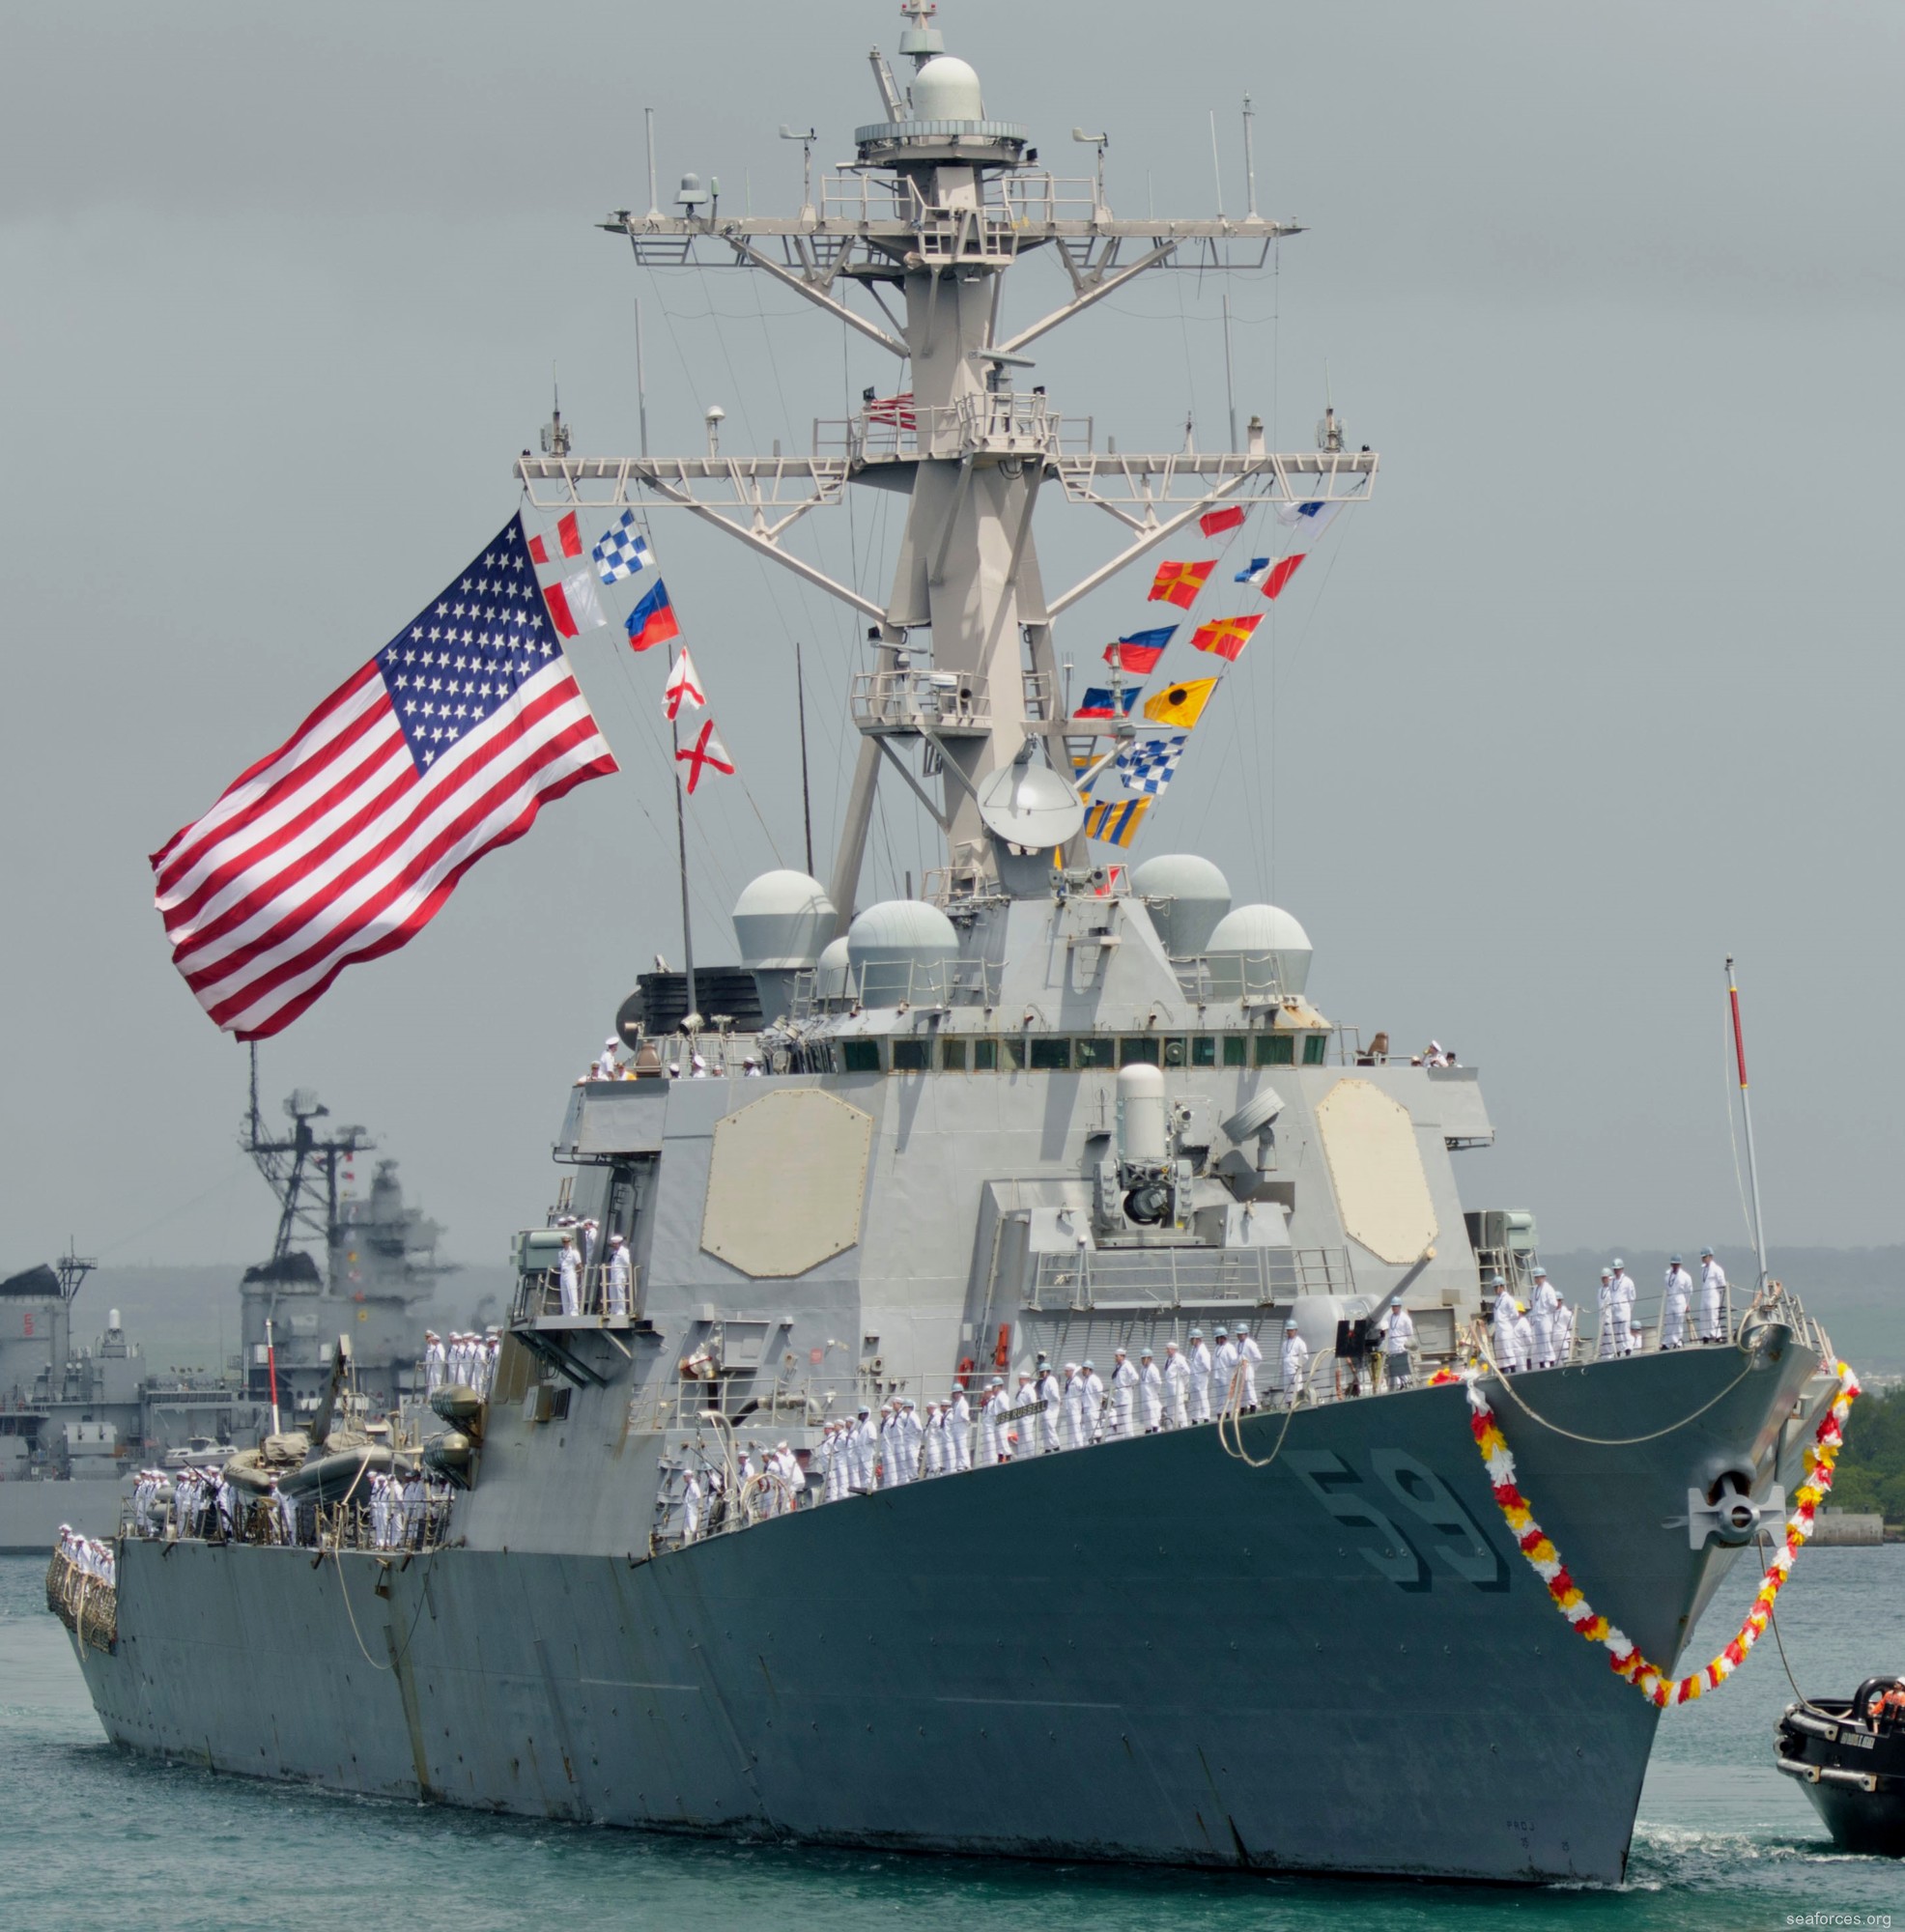 ddg-59 uss russell guided missile destroyer us navy 10 joint base pearl harbor hickam hawaii